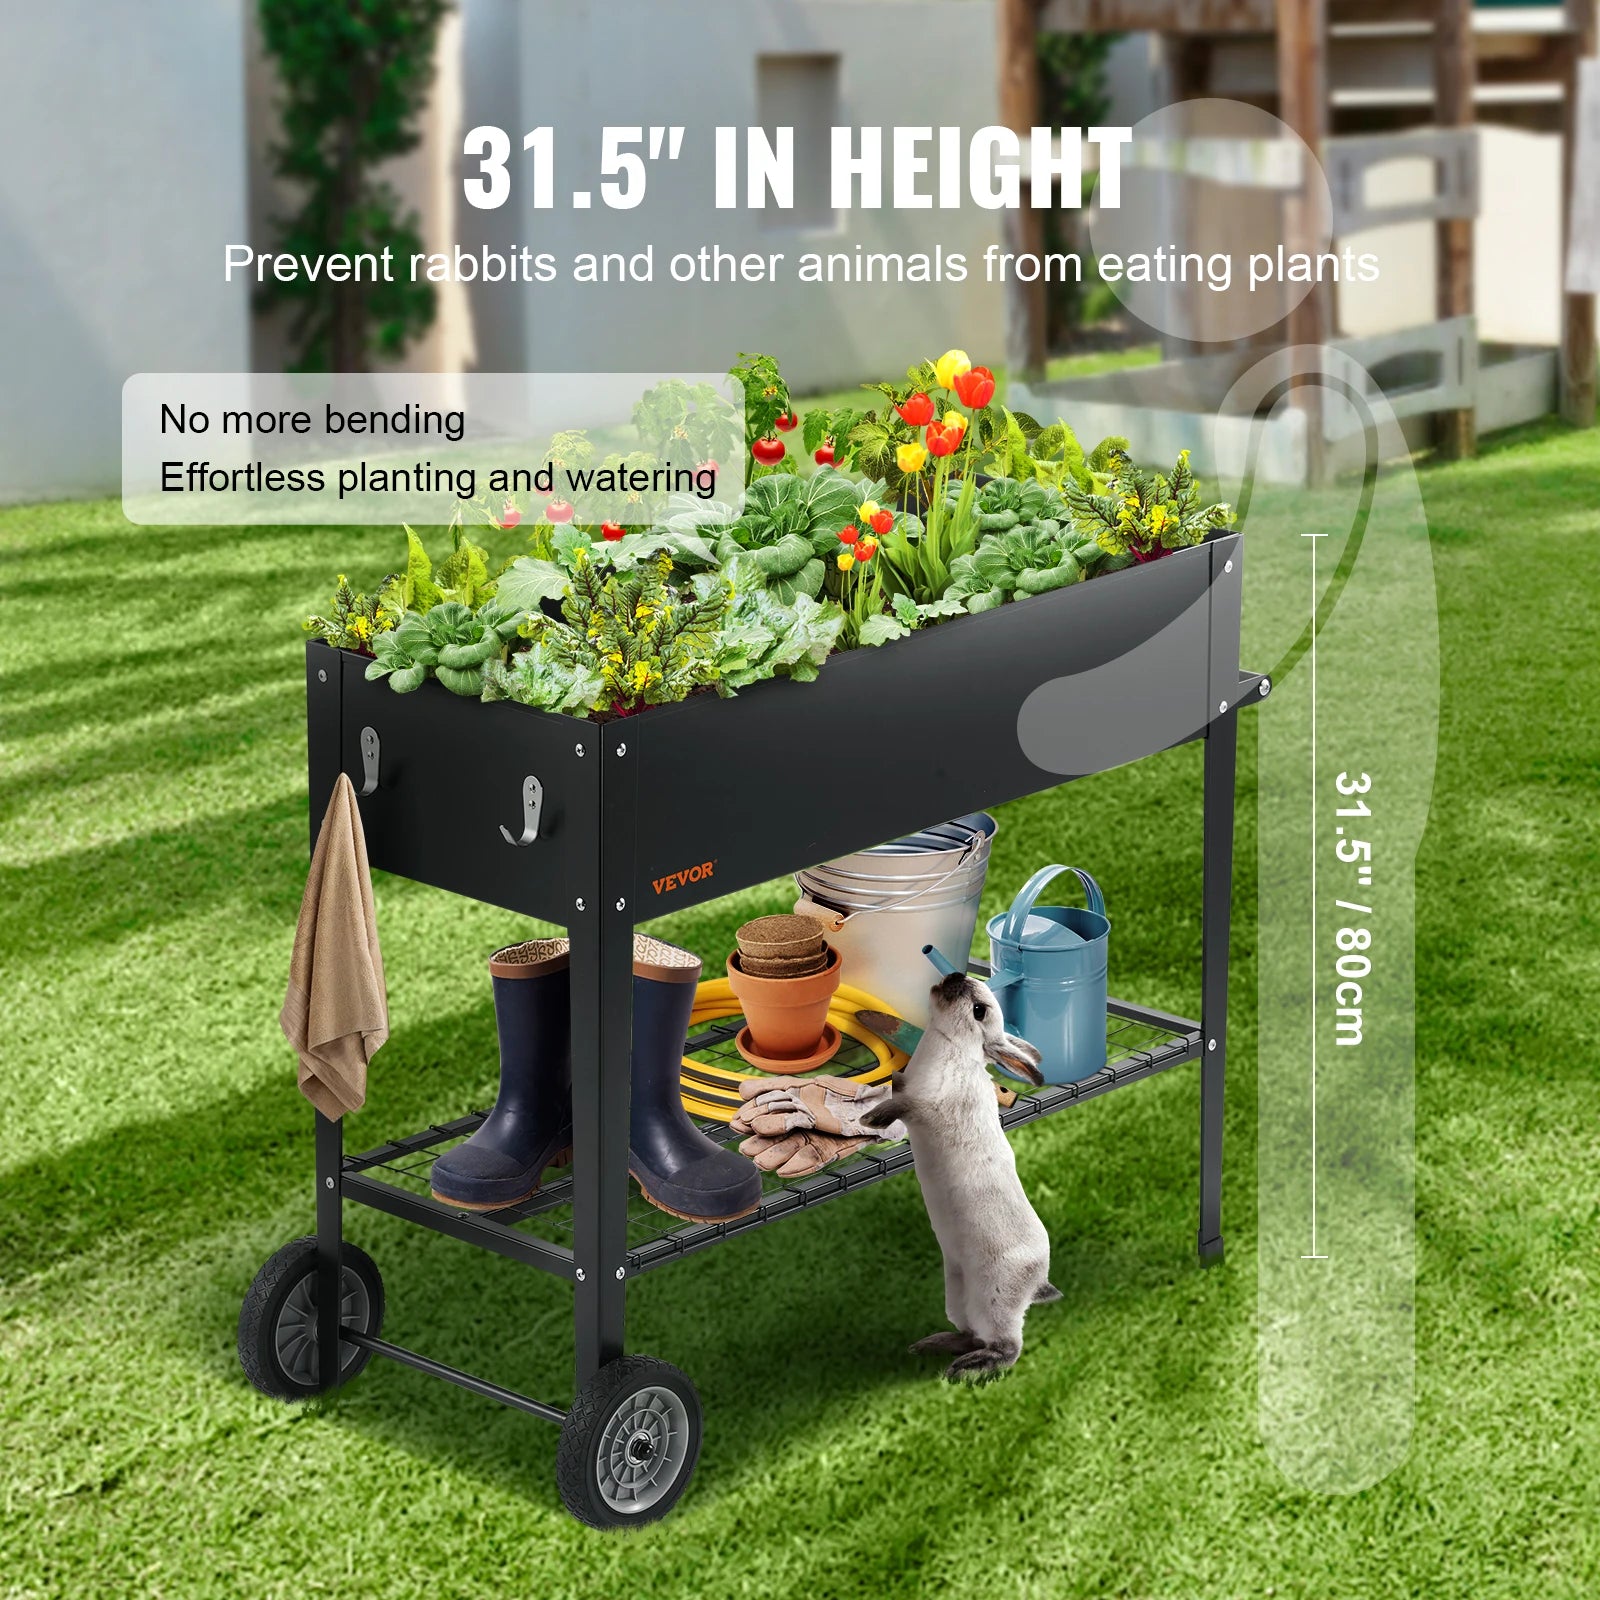 VEVOR Raised Garden Bed, 42.5 x 19.5 x 31.5 inch Galvanized Metal Planter Box, Elevated Outdoor Planting Boxes with Legs, Black